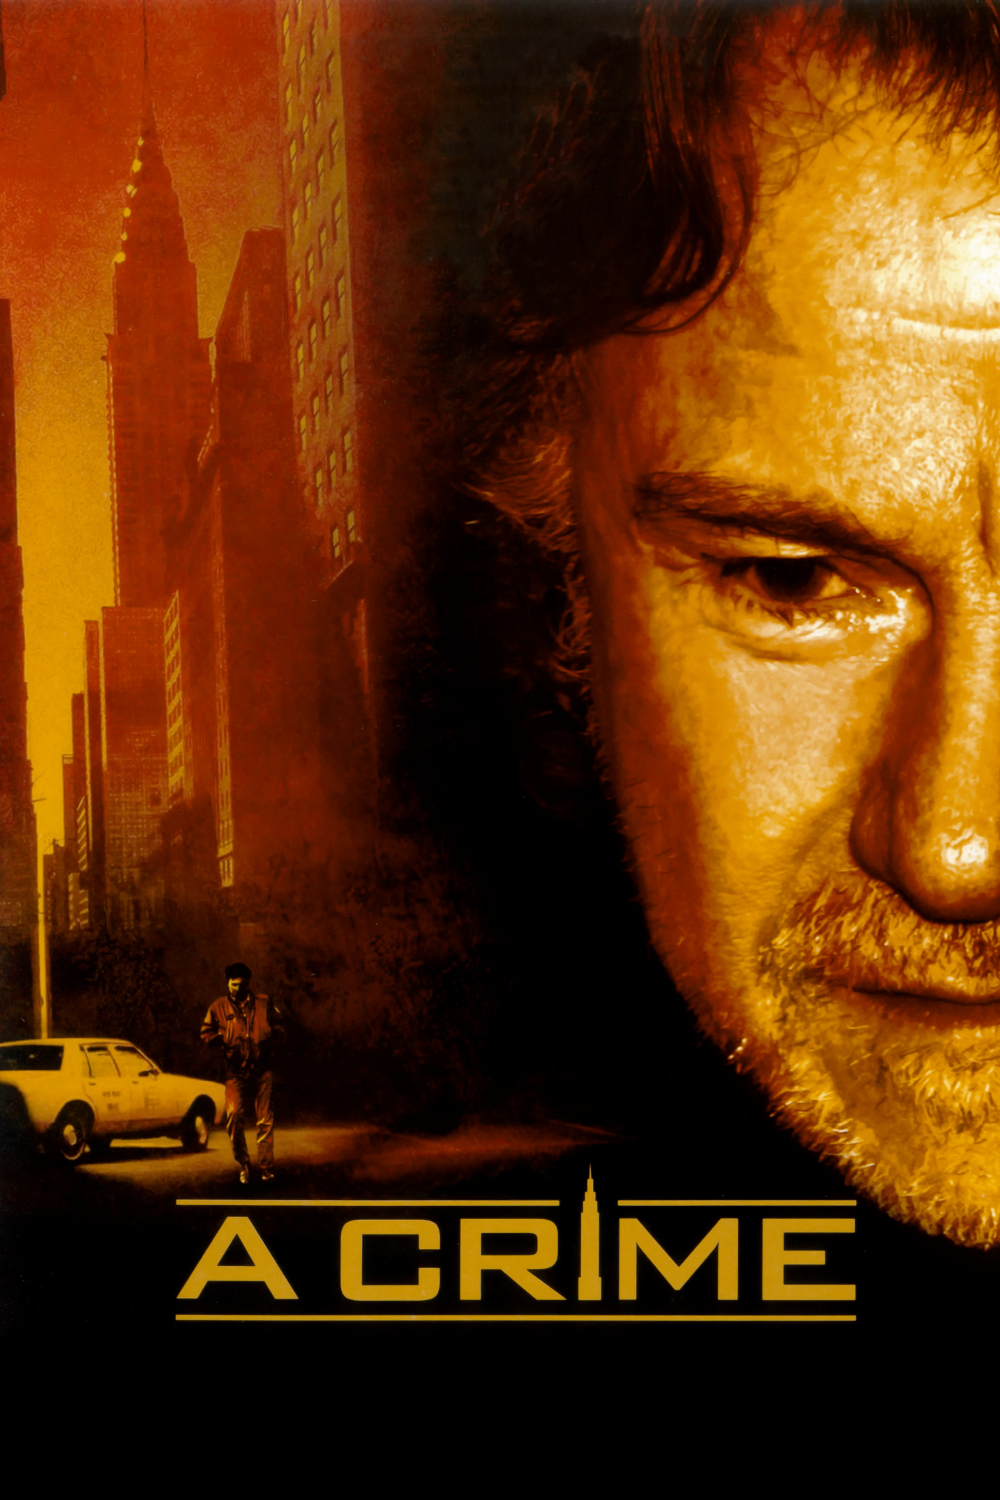 Poster for the movie "A Crime"